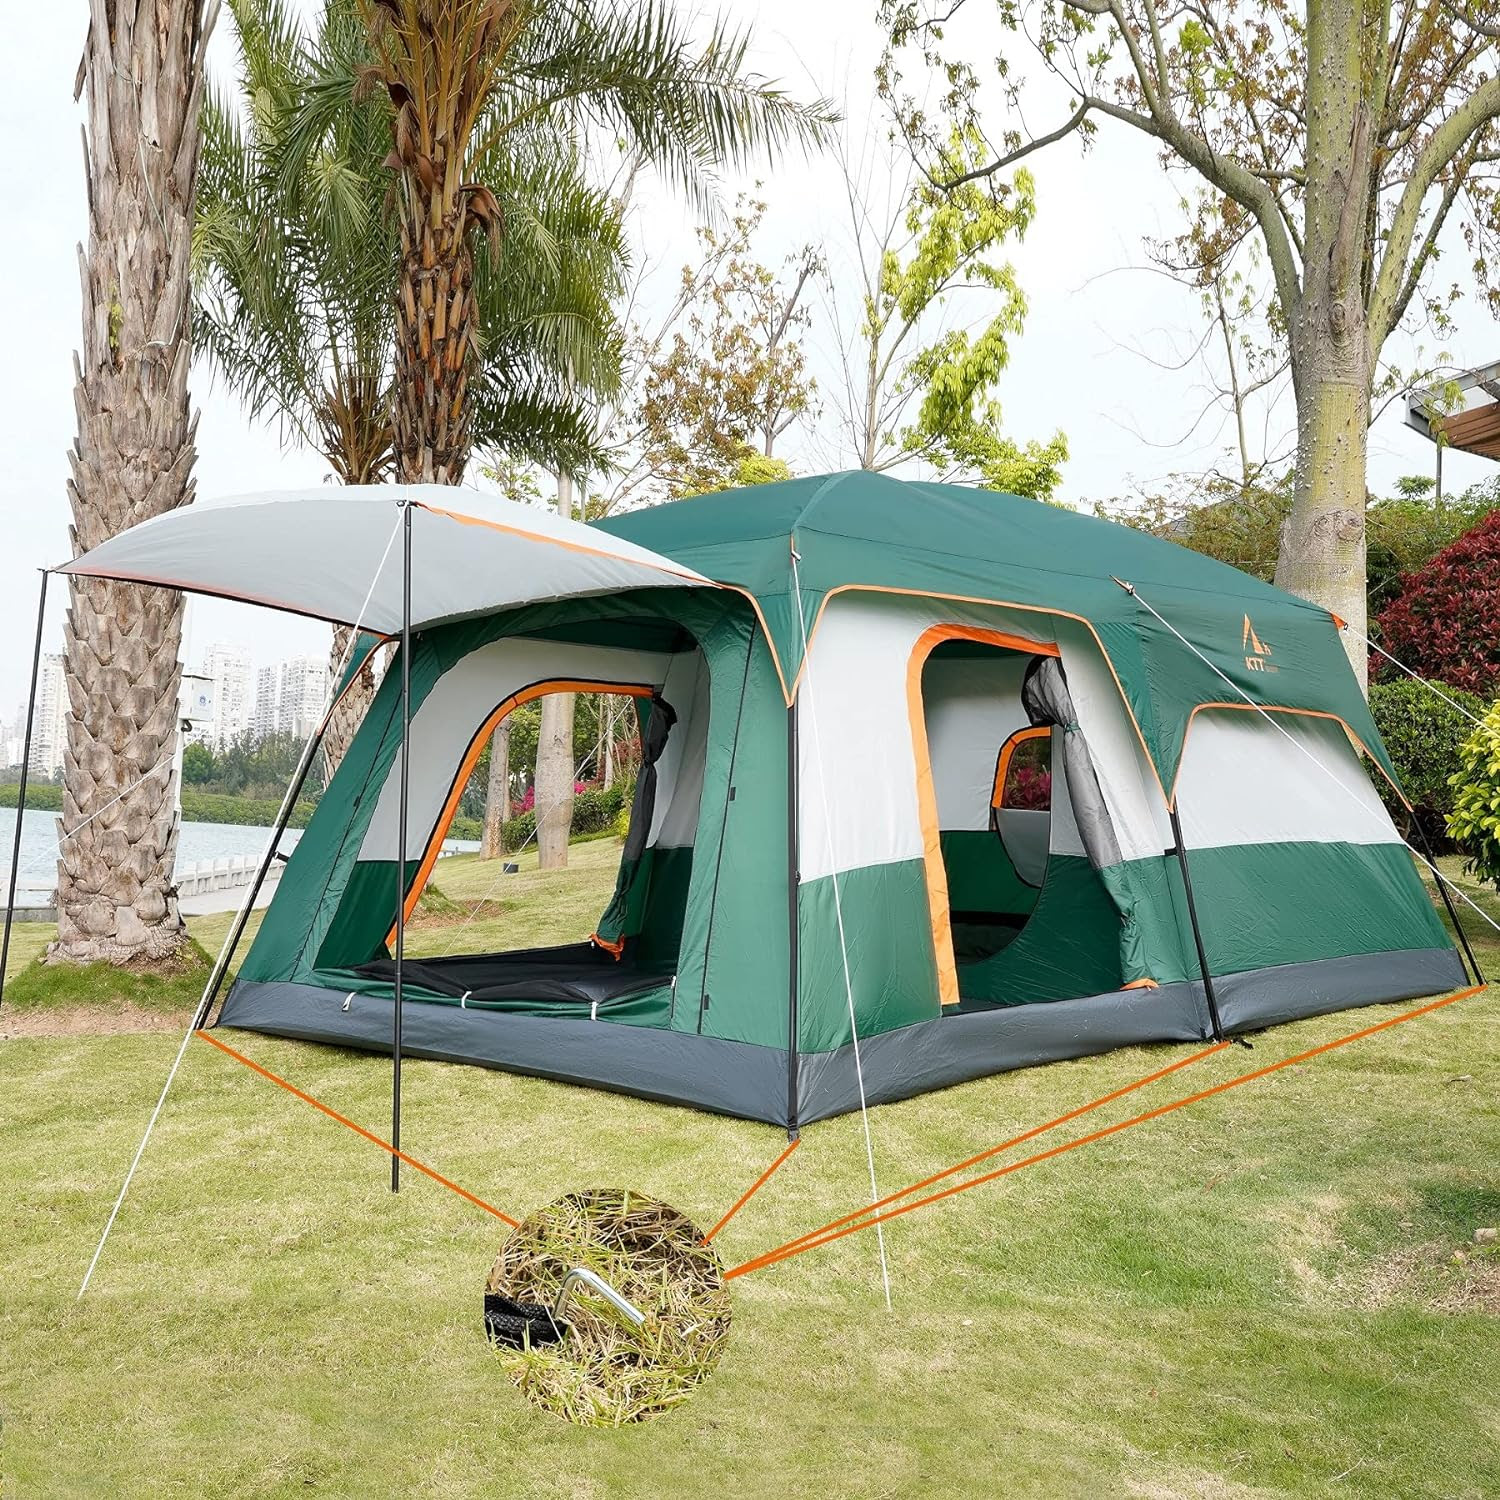 KTT Extra Large12 Person Family Cabin Tent. 125 units. EXW Los Angeles $95.00 unit.